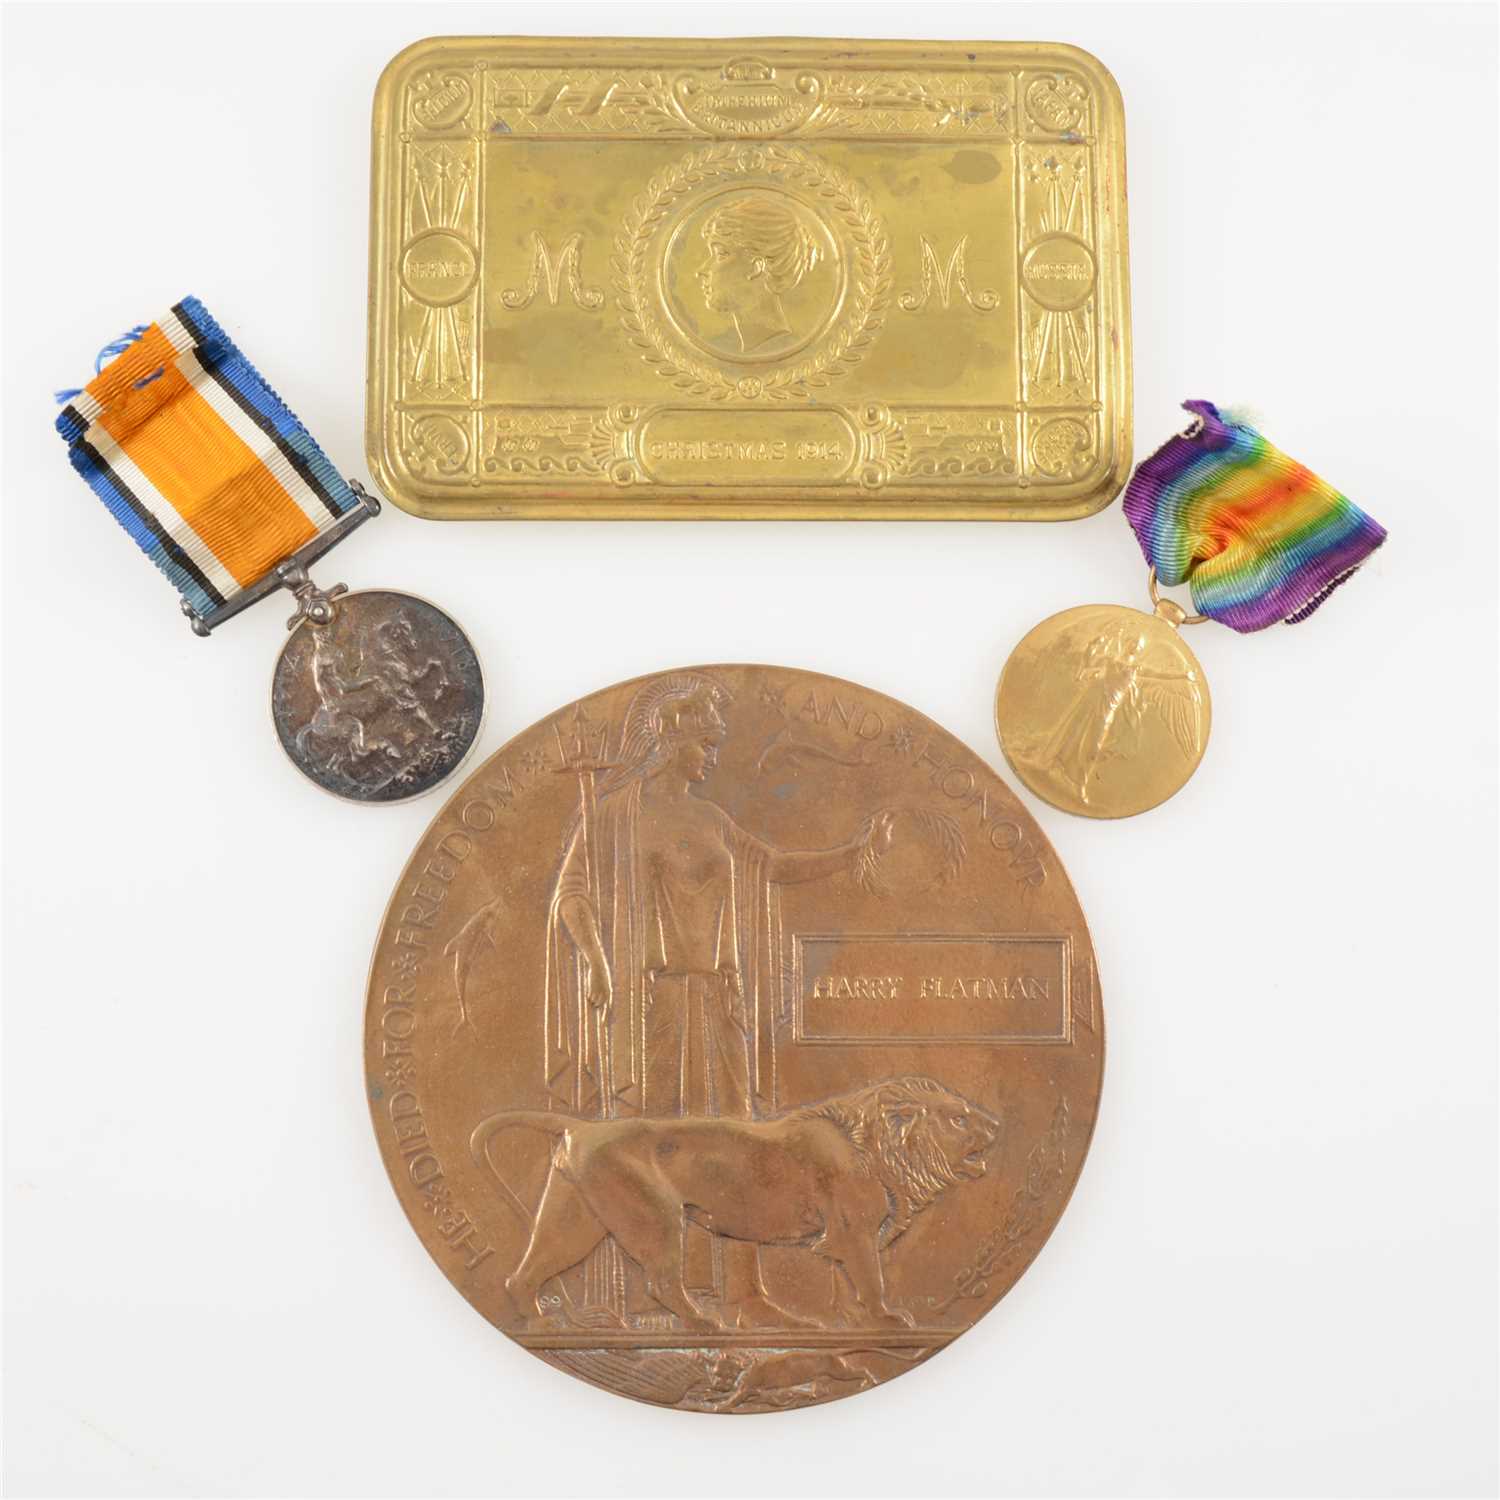 Lot 174 - Medals; WWI pair and death penny, 316092 Pte. Harry Flatman Middlesex Regiment